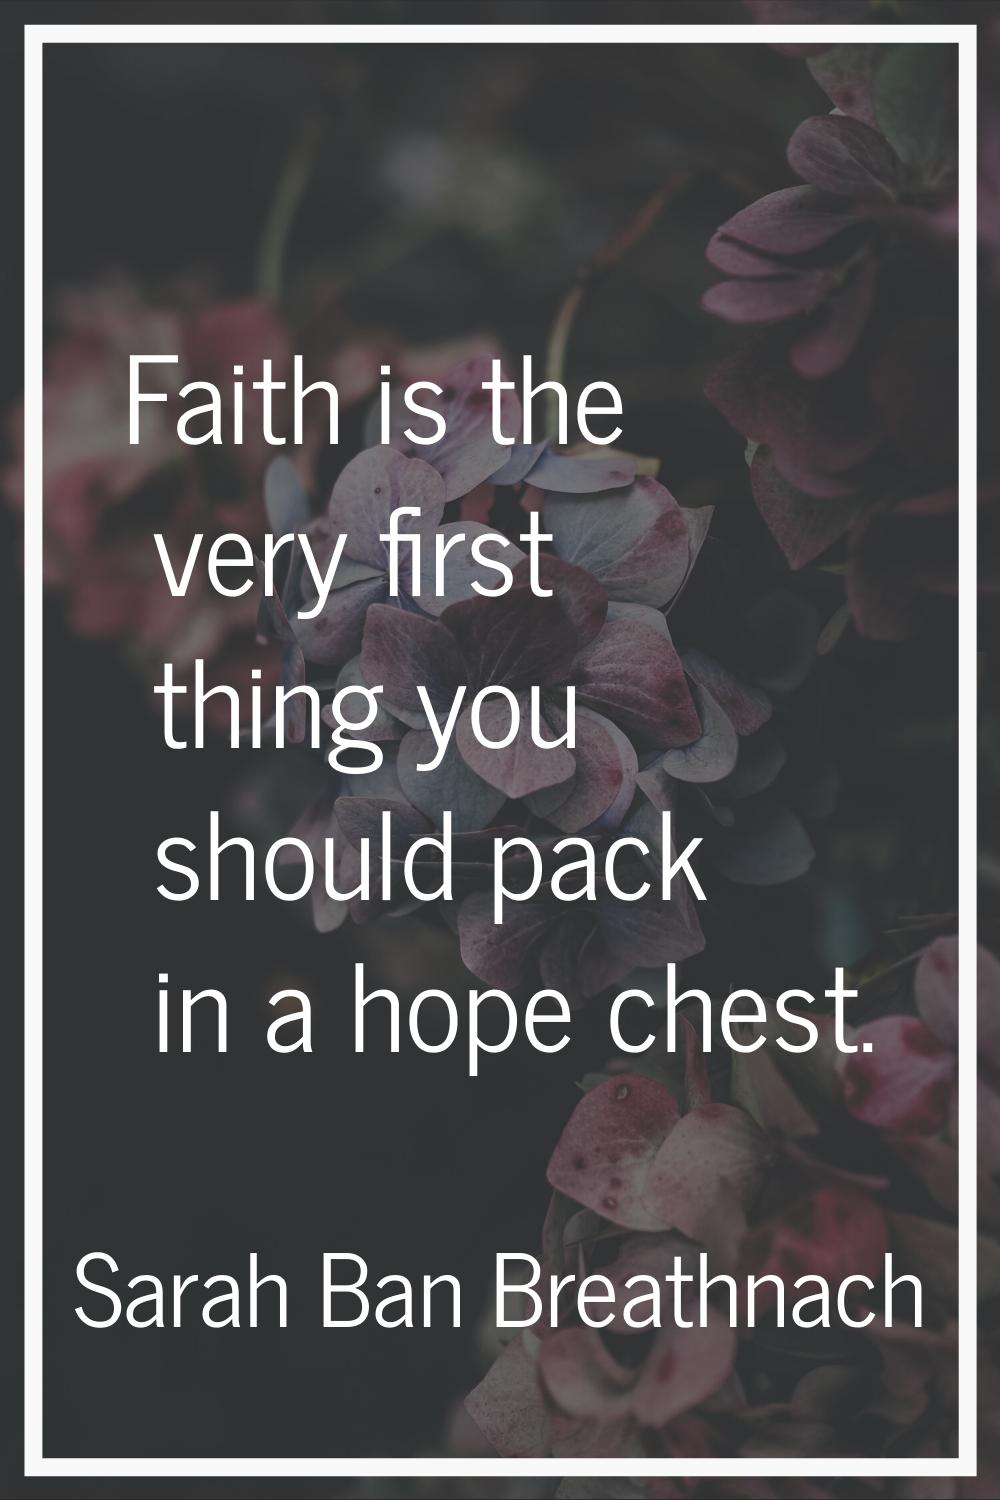 Faith is the very first thing you should pack in a hope chest.